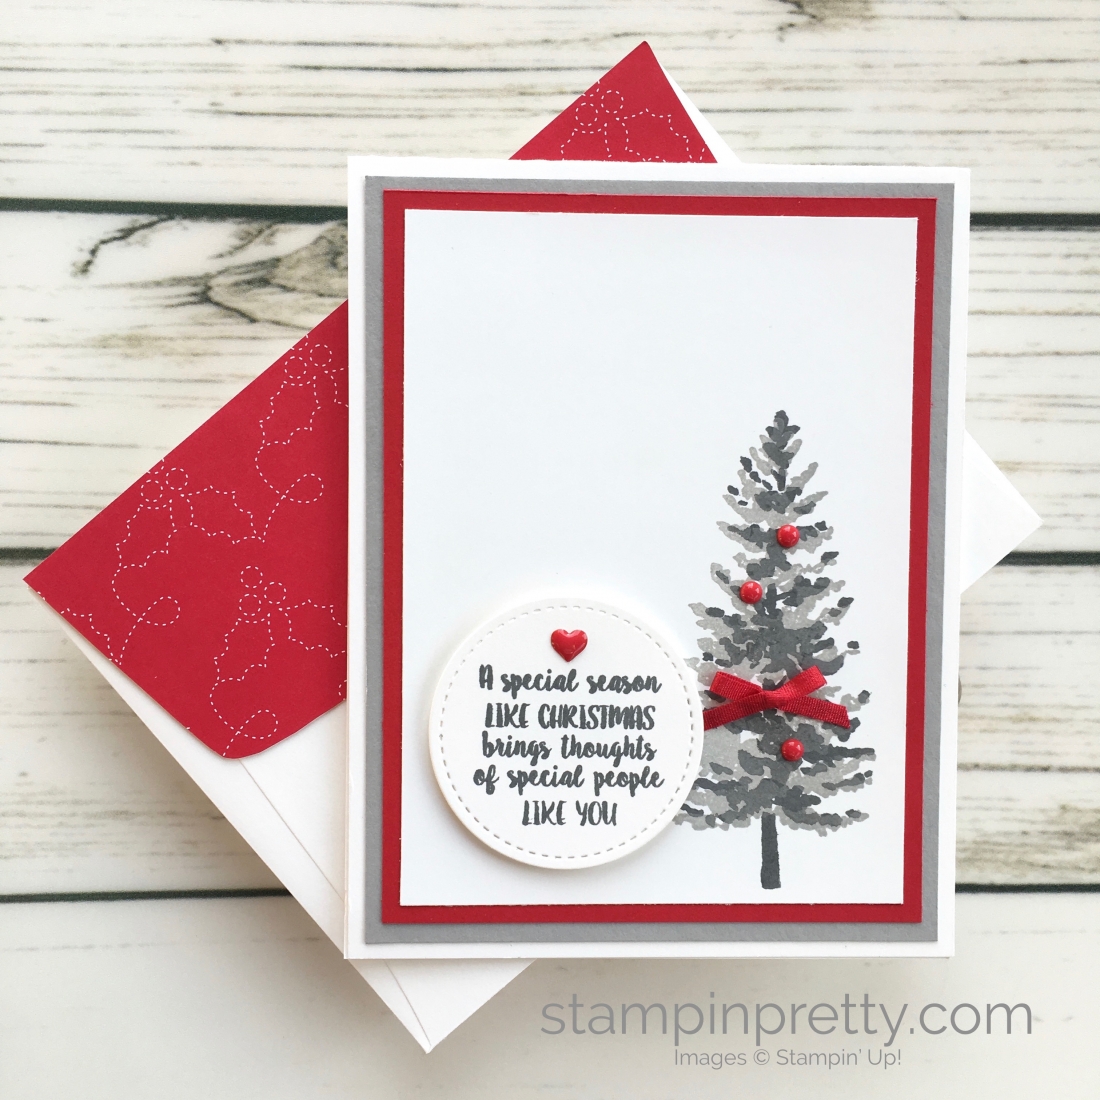 ***RETIRED***Stampin Up HOLIDAY Stamp Sets 